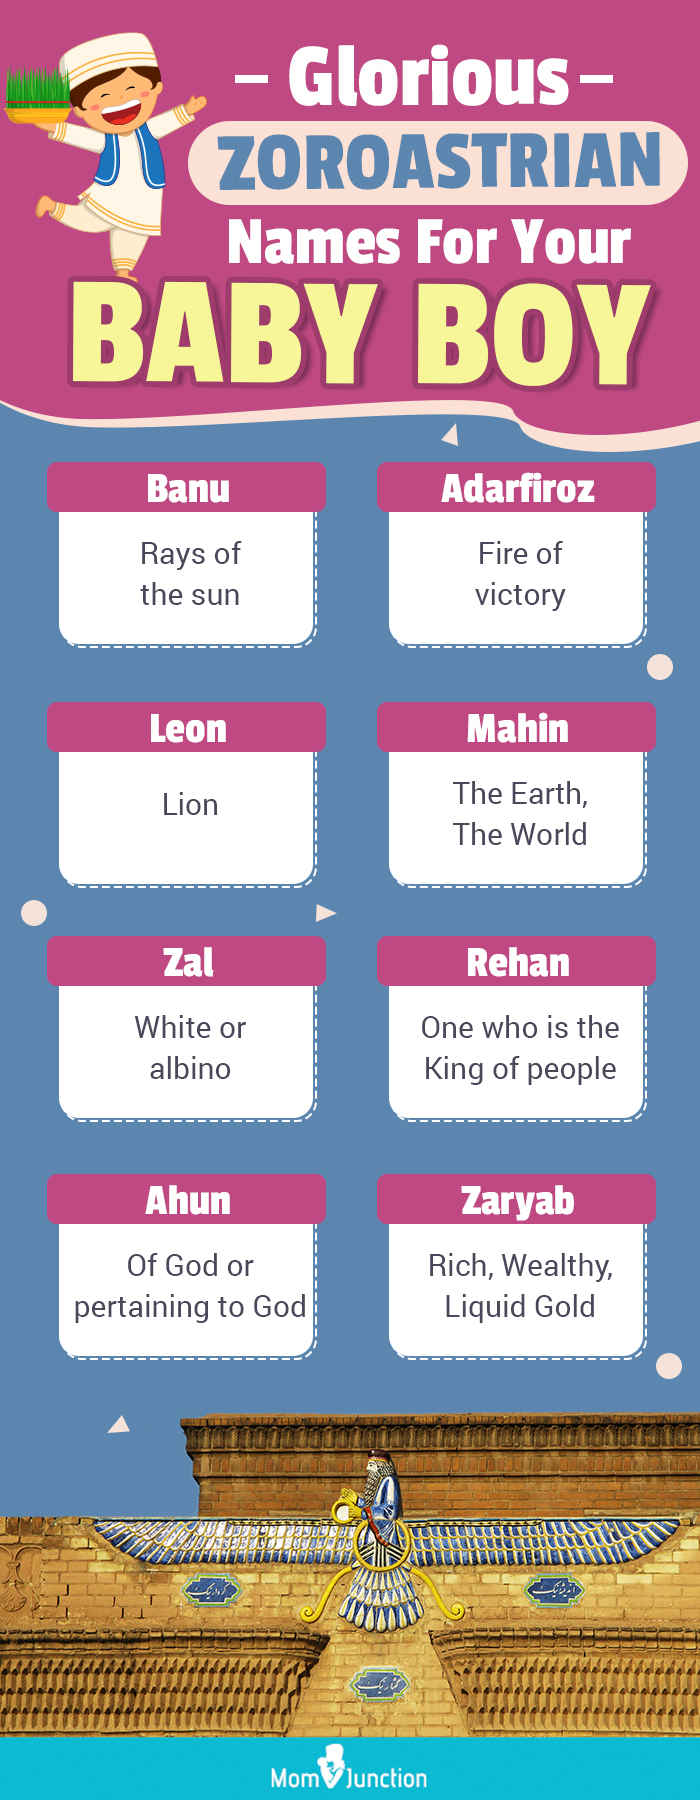 glorious zoroastrian names for your baby boy (infographic)